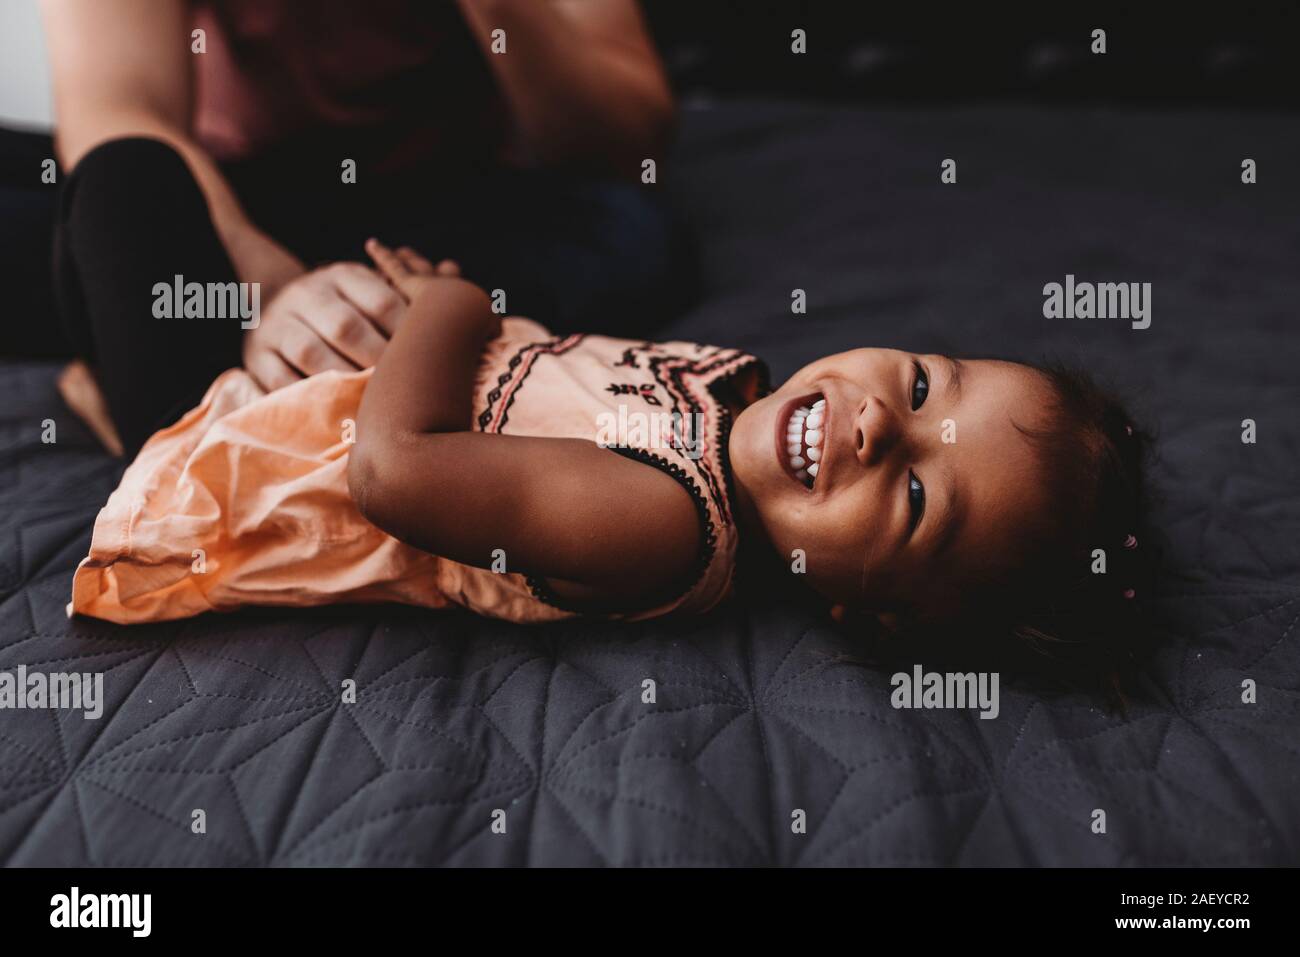 Sweet multiracial 2 yr old girl lying on bed laughing Stock Photo